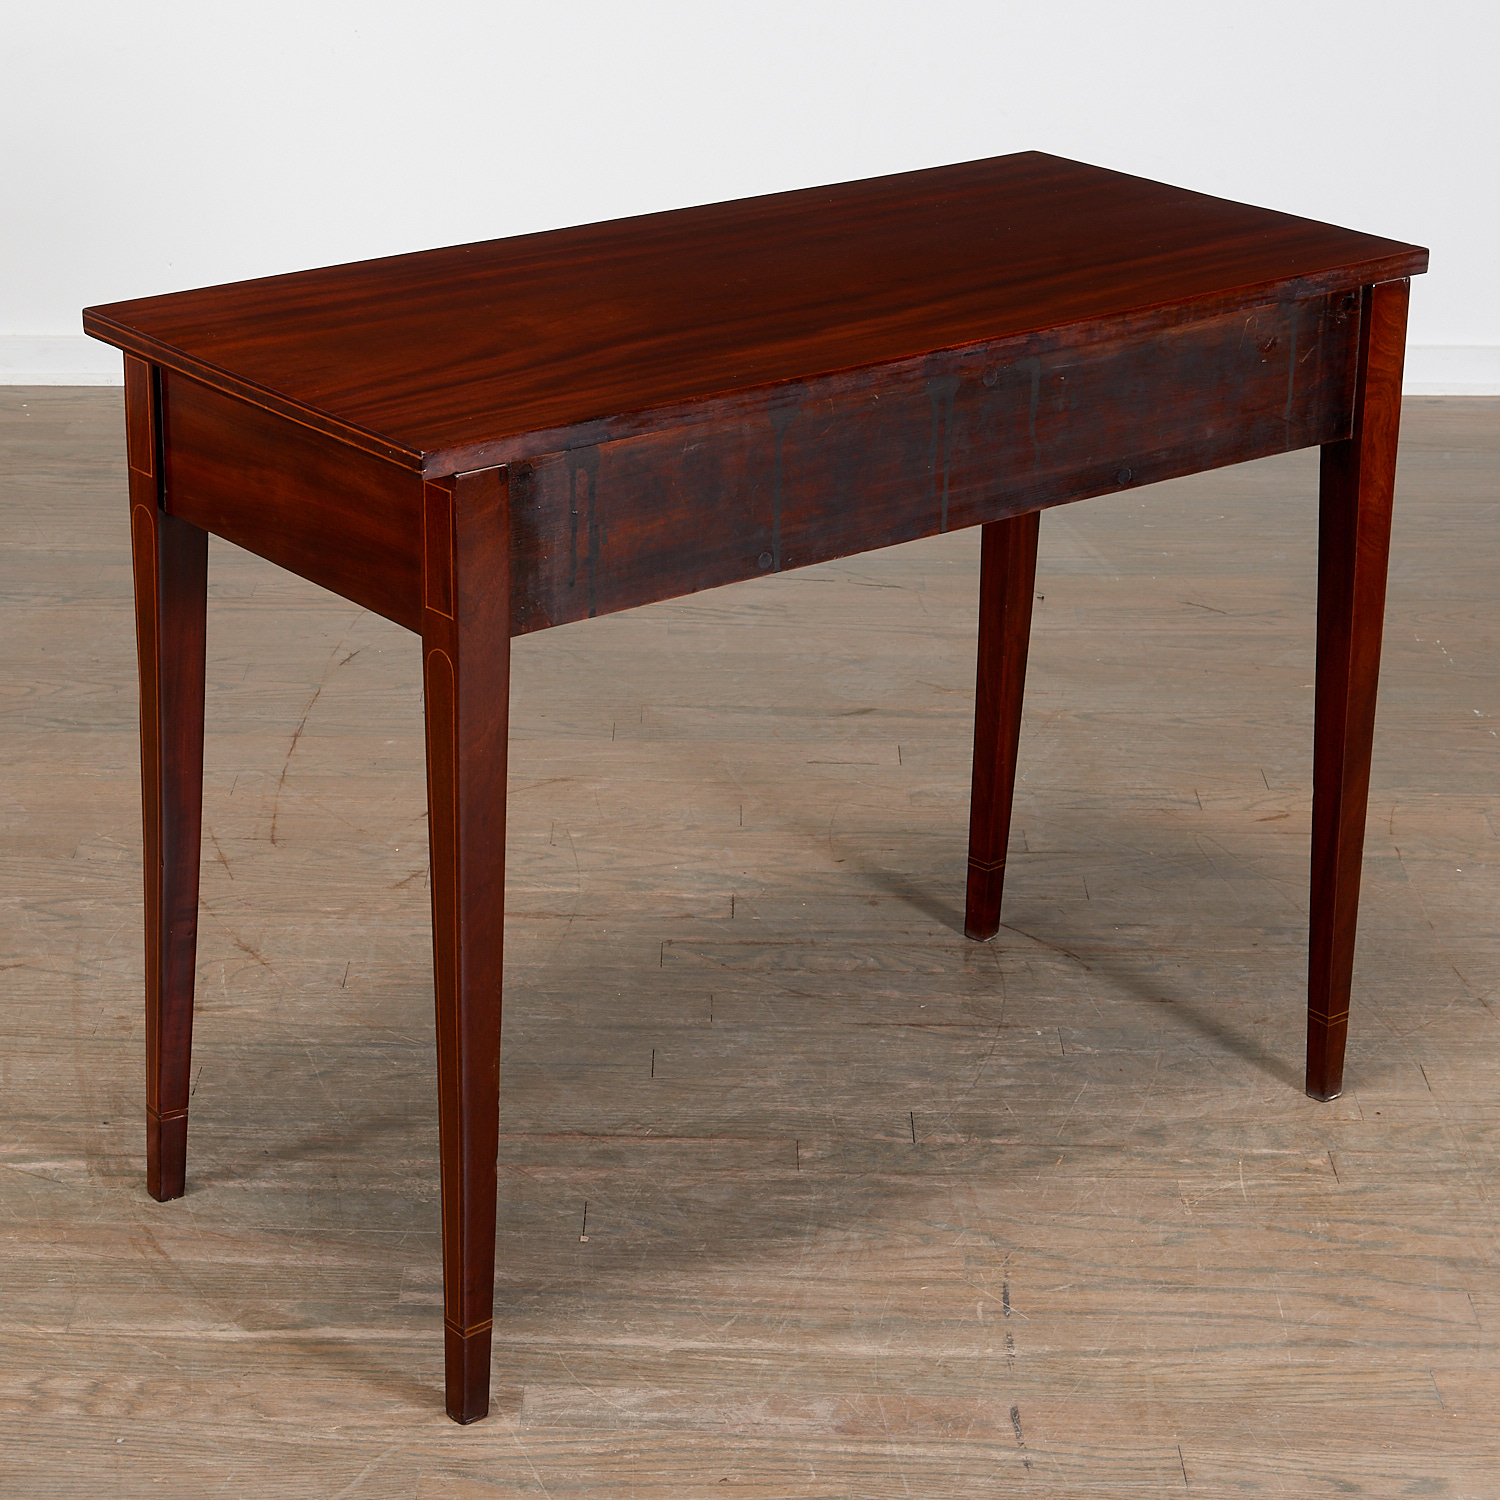 American Federal Inlaid Mahogany Side Table - Image 4 of 4